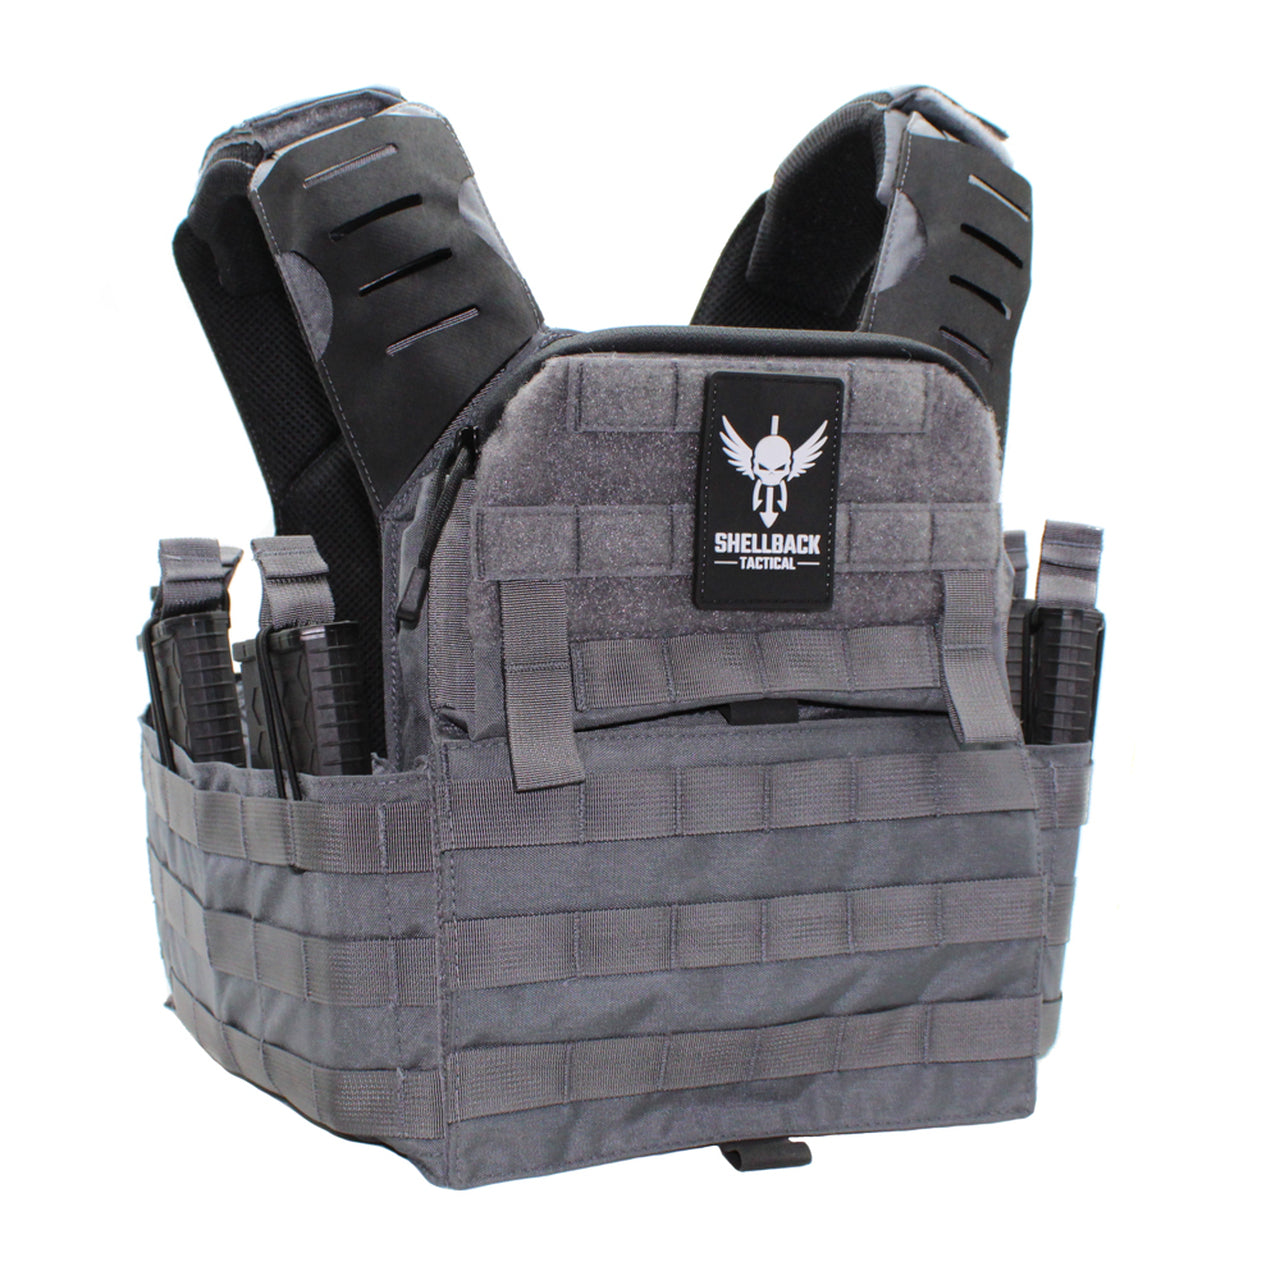 Tactical Motorcycle Vest High Quality Similar to Bane FullyFunctional Vest   eBay